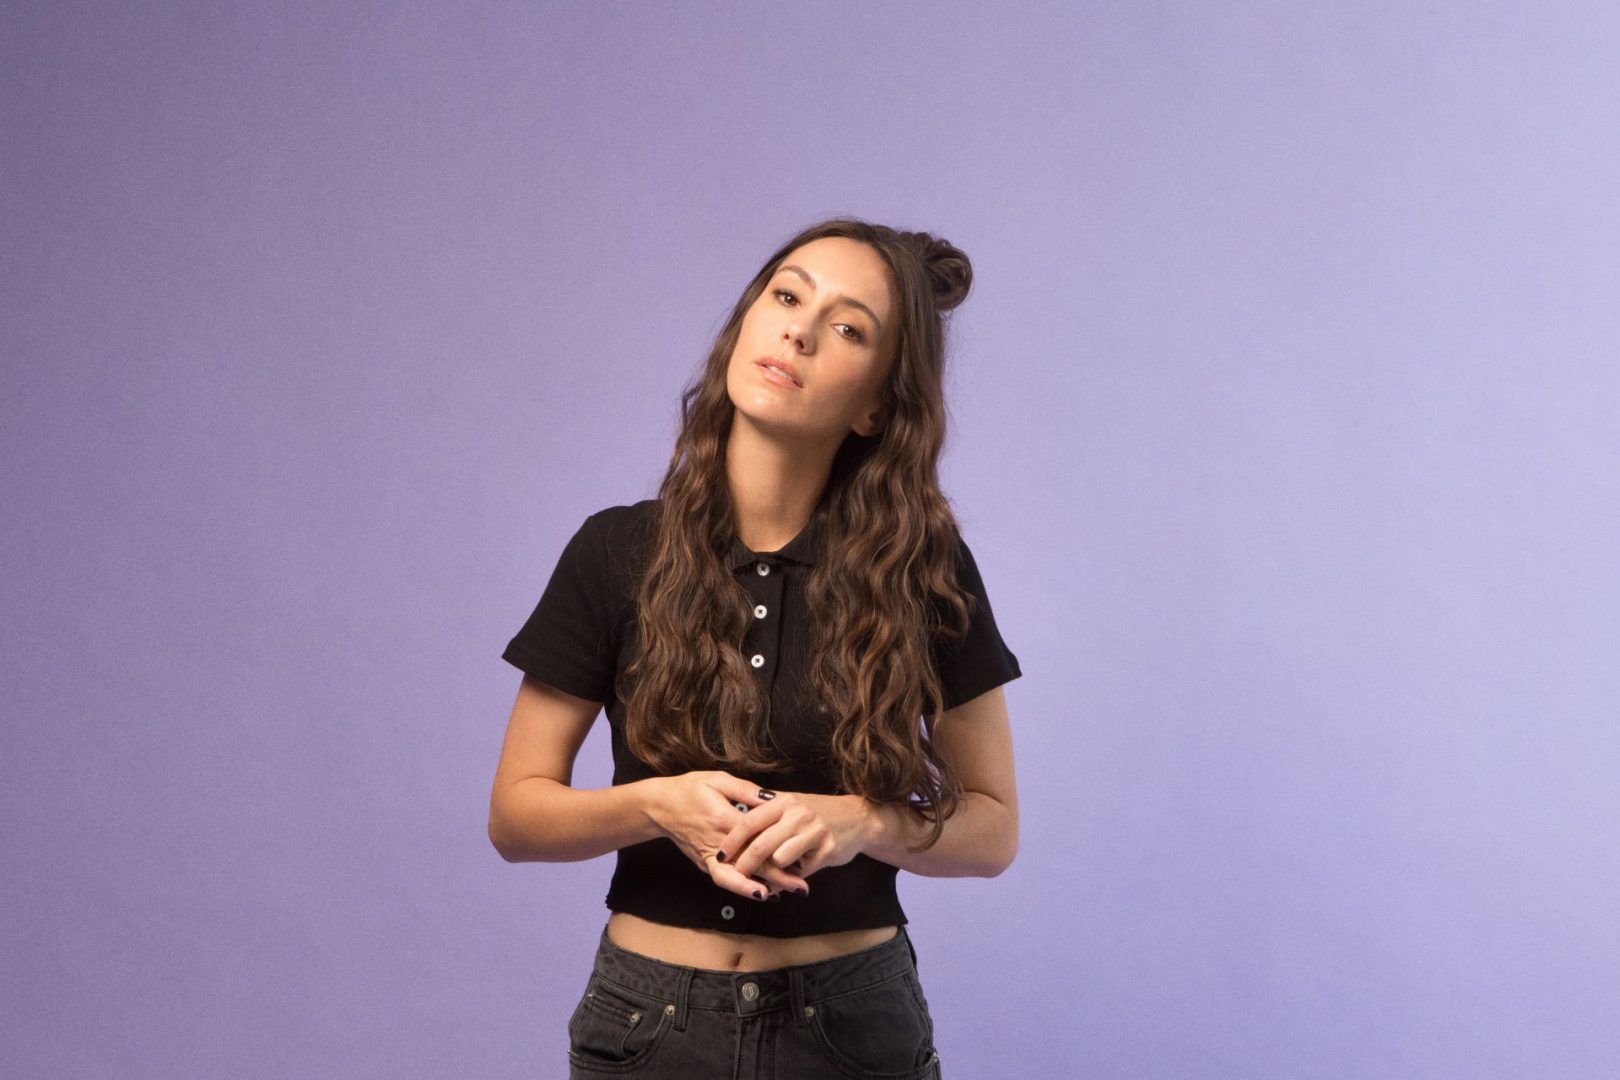 On the music scene with Amy Shark